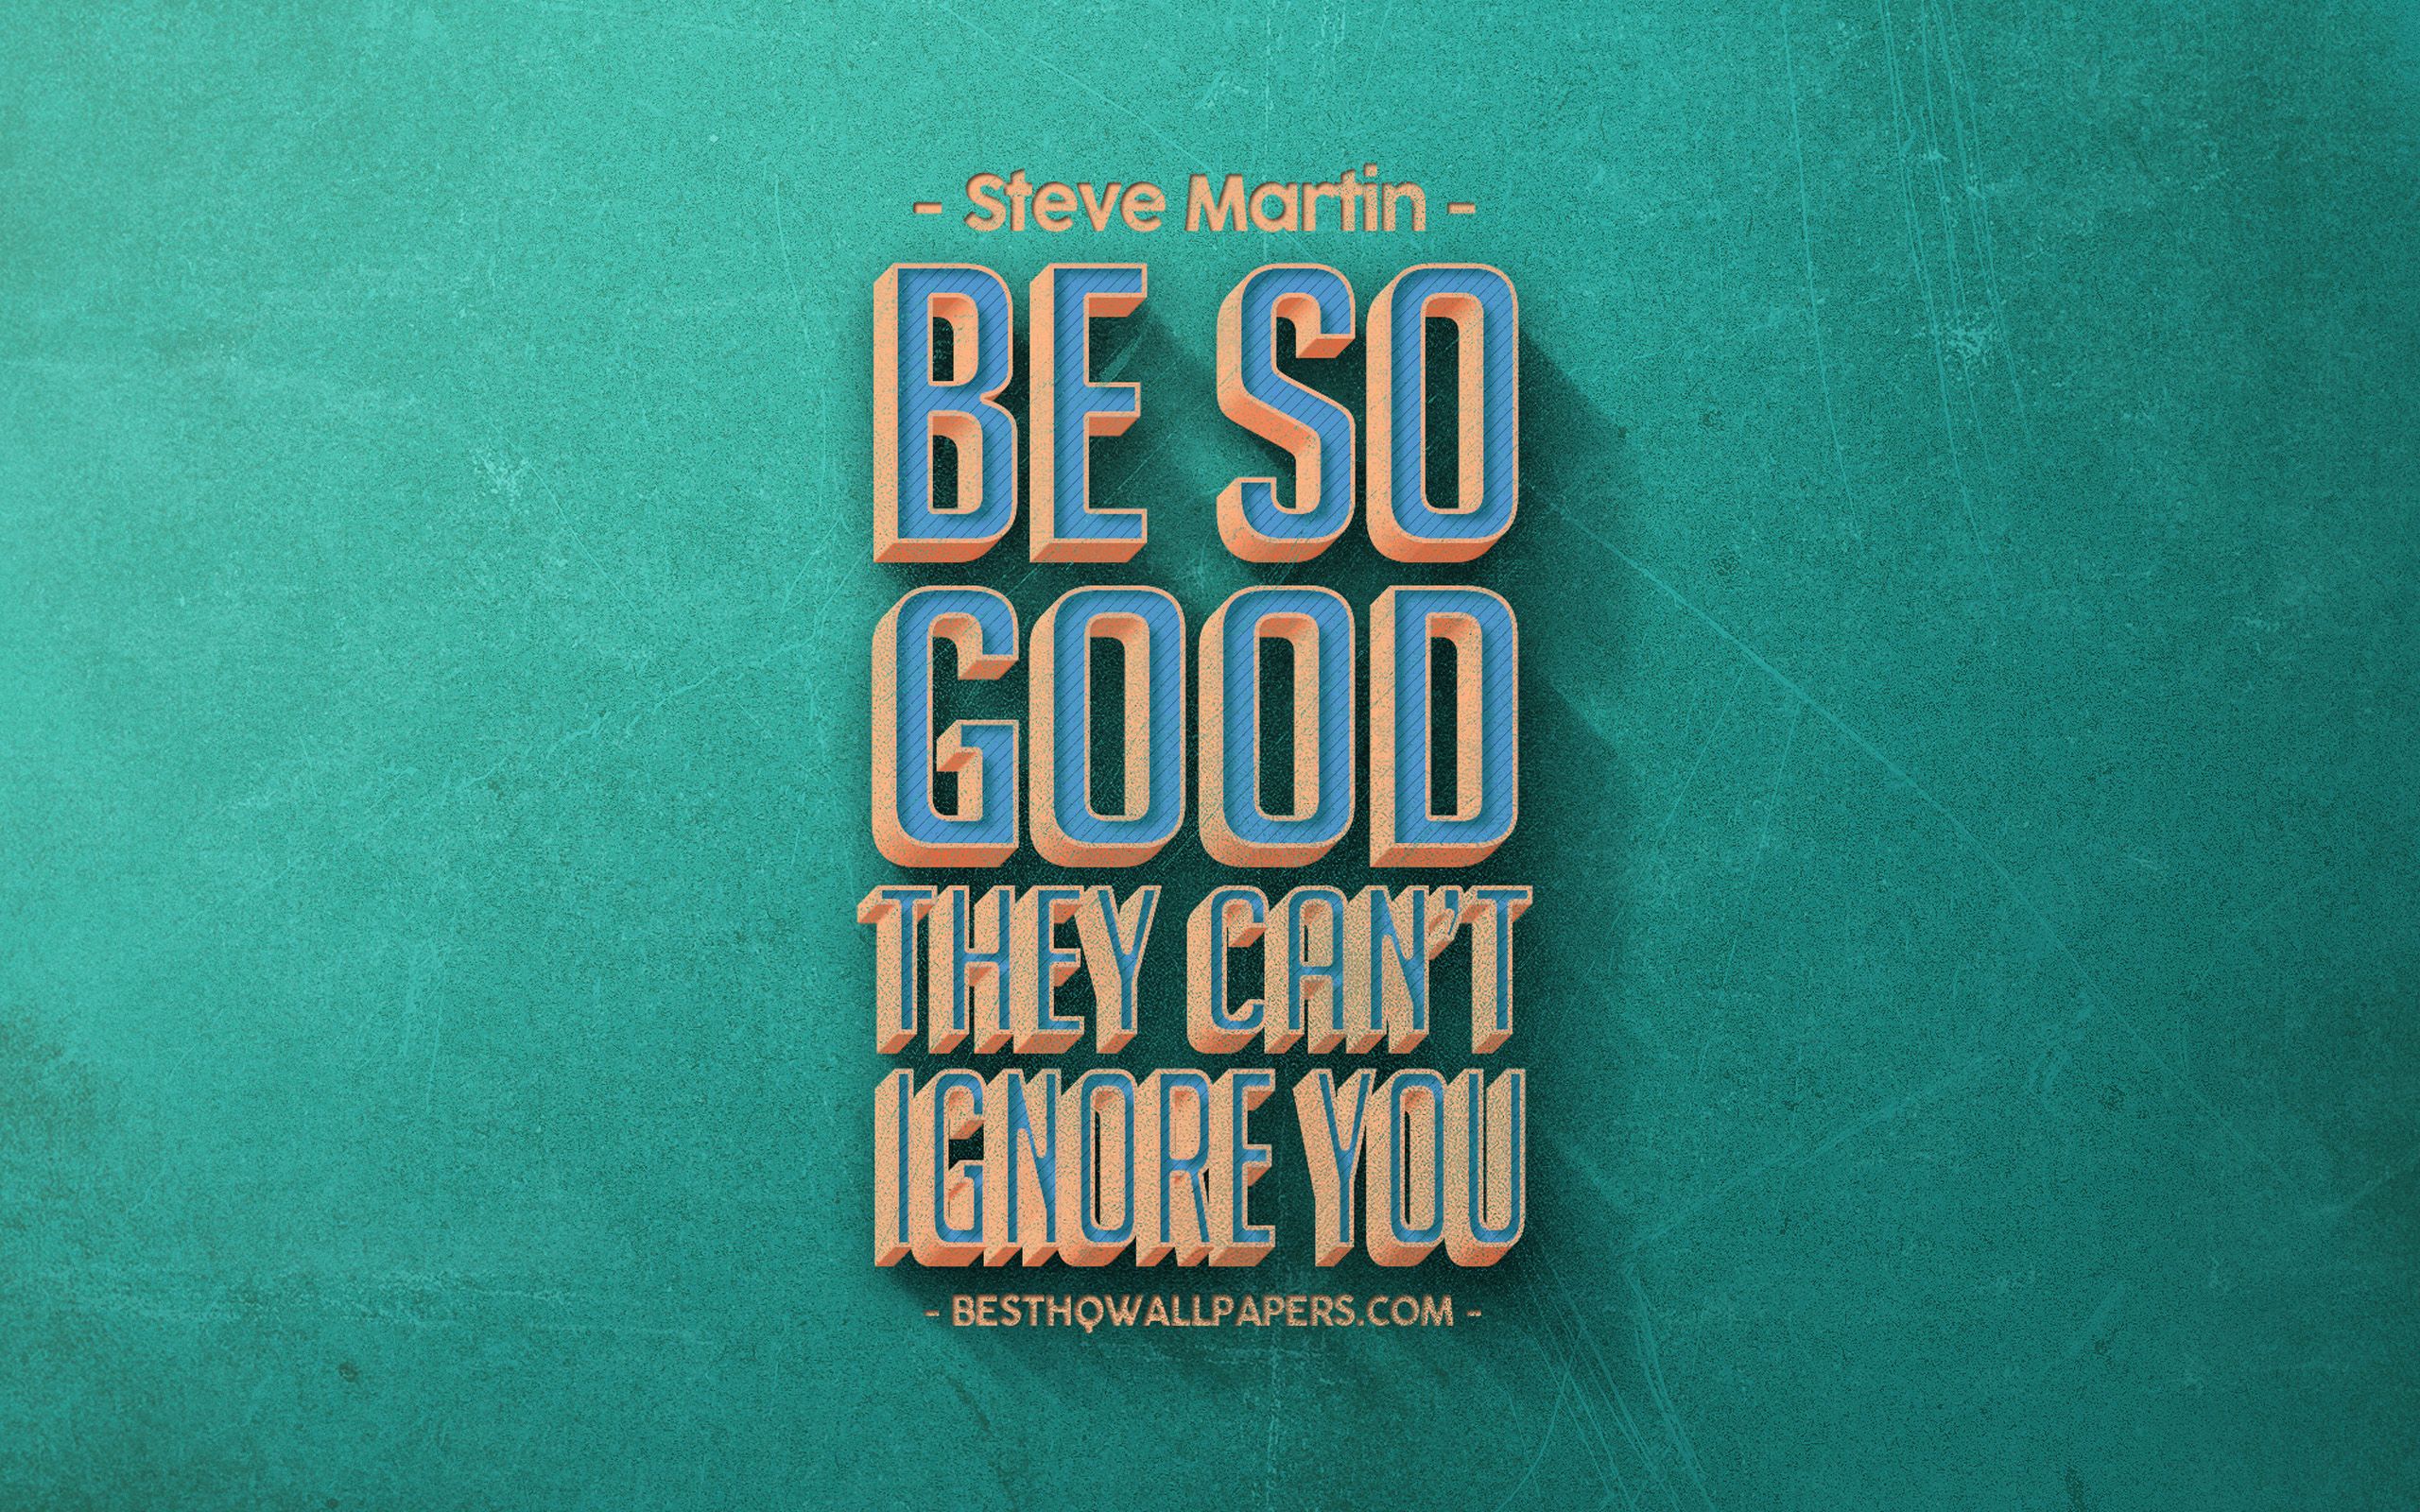 Download wallpaper Be so good they can not ignore you, Steve